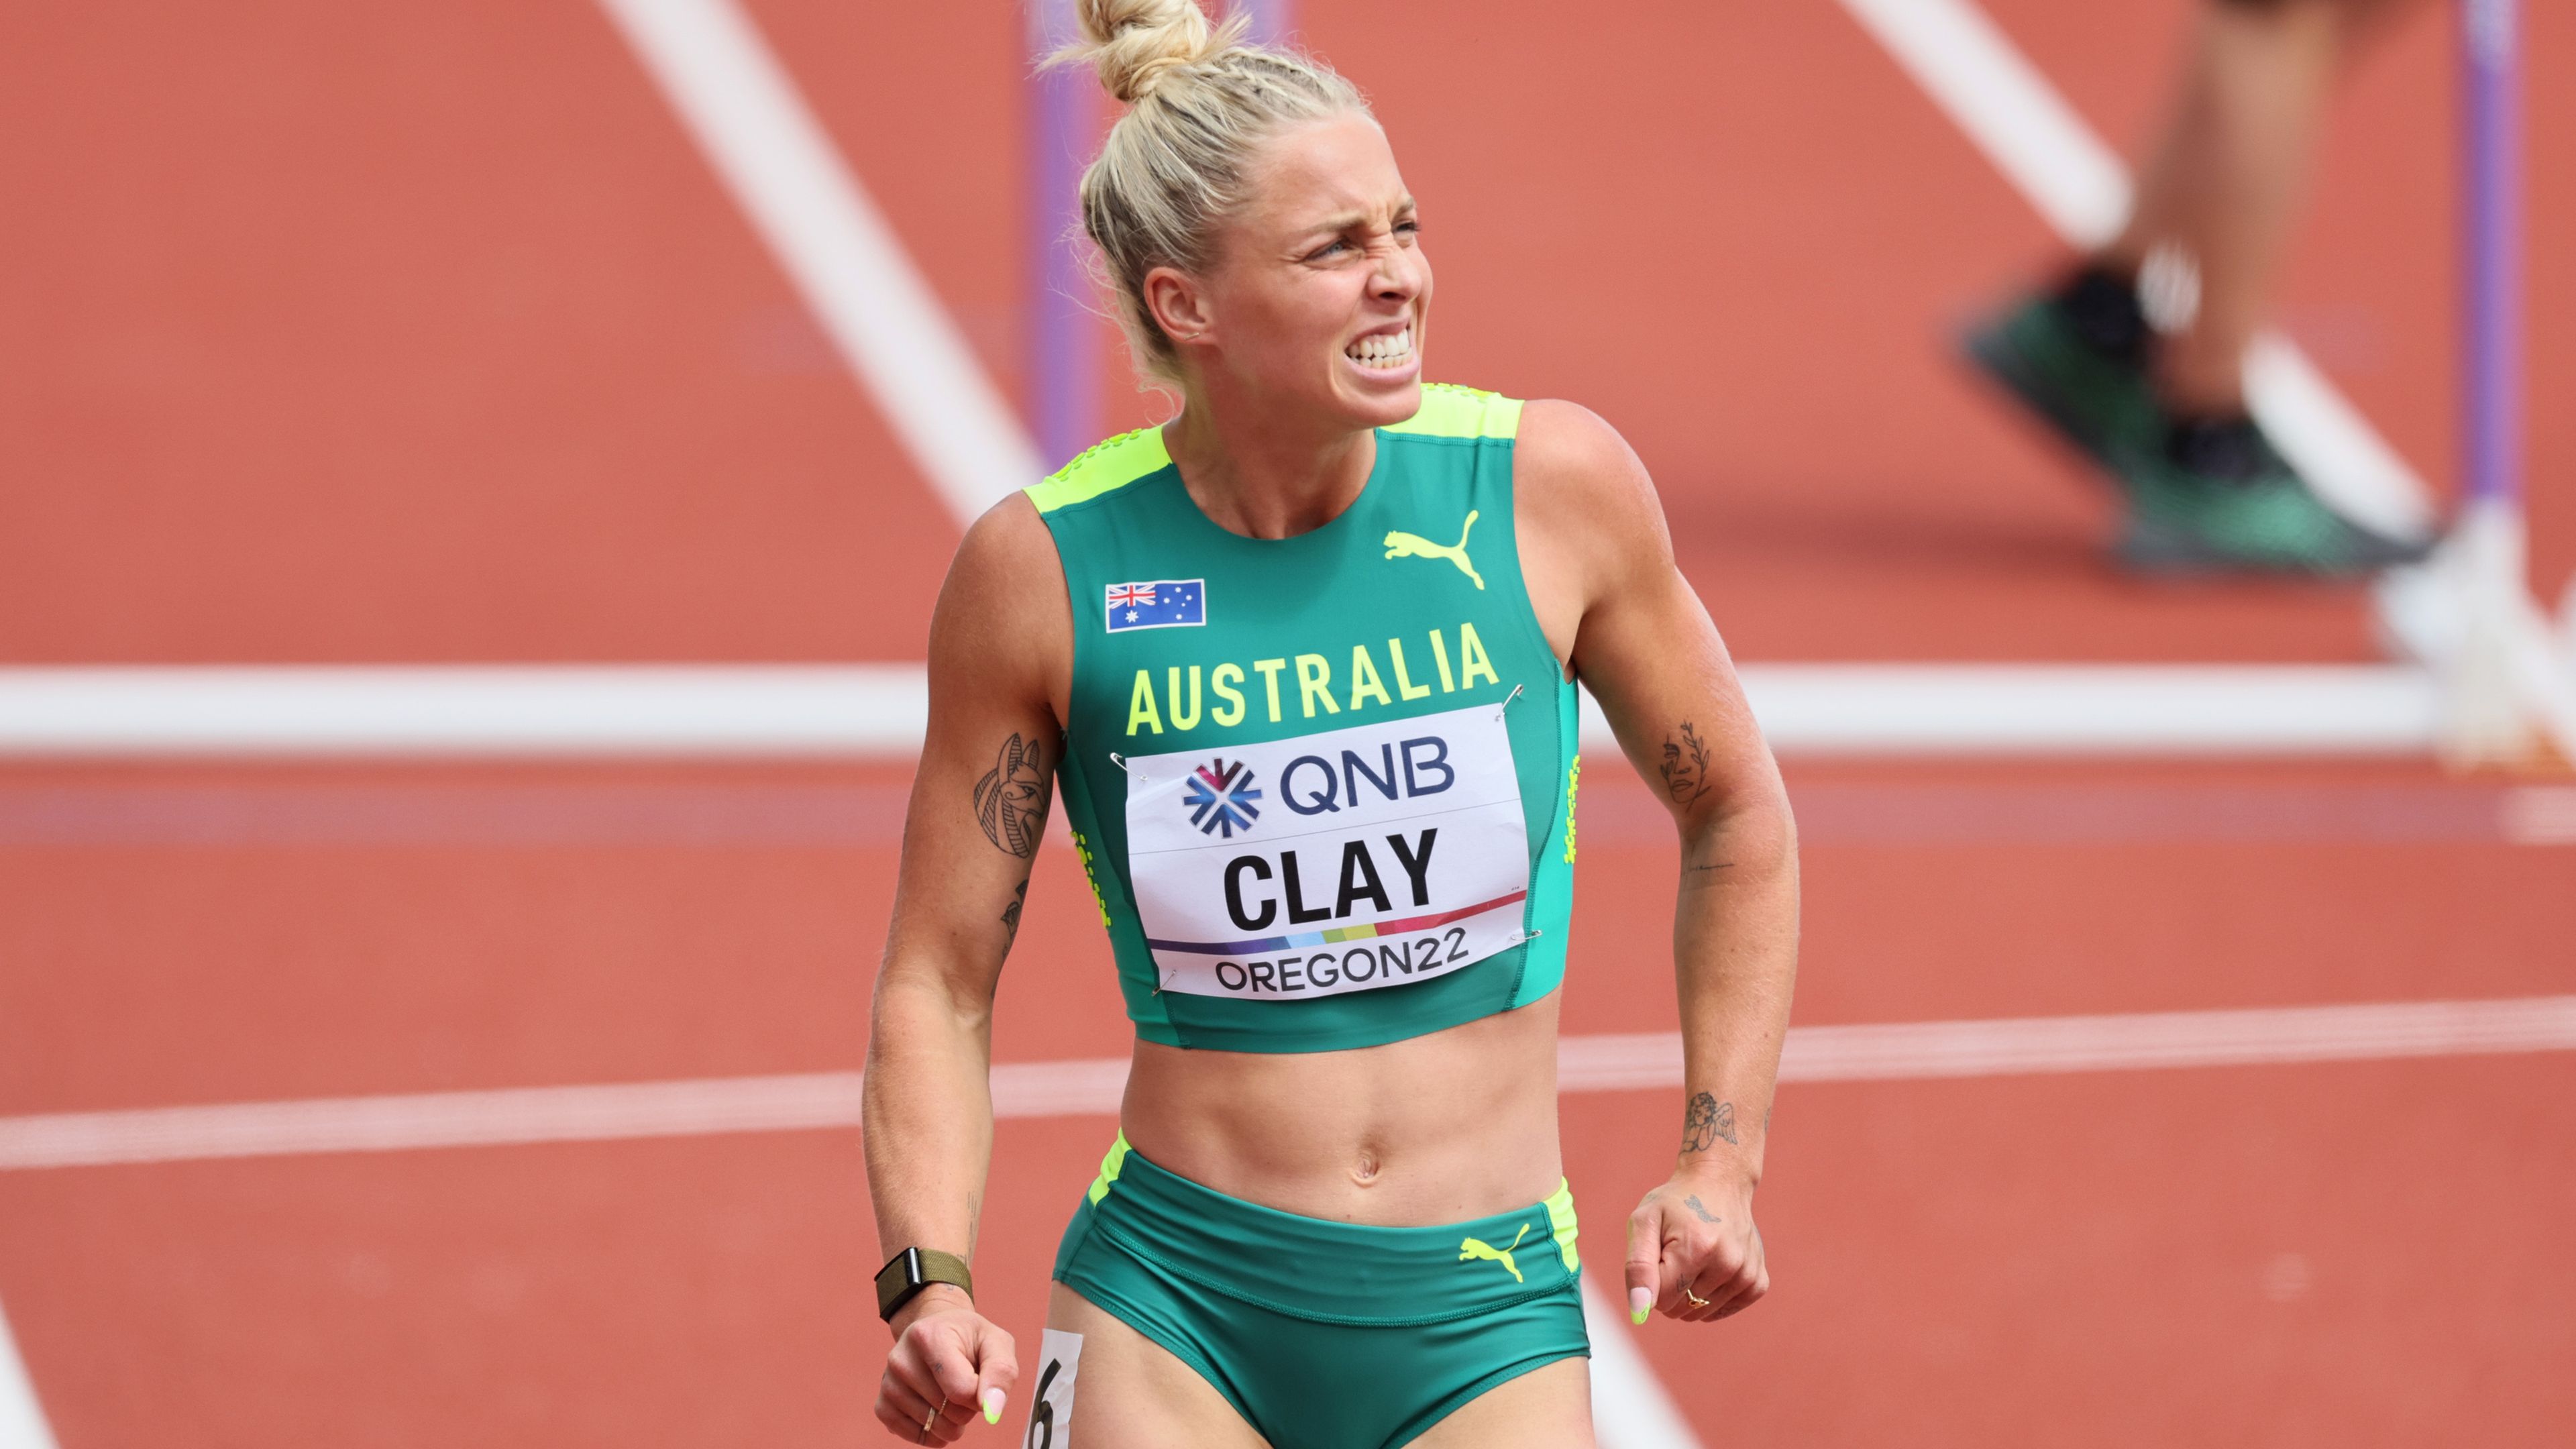 Australian hurdler Liz Clay out of Commonwealth Games with fractured foot